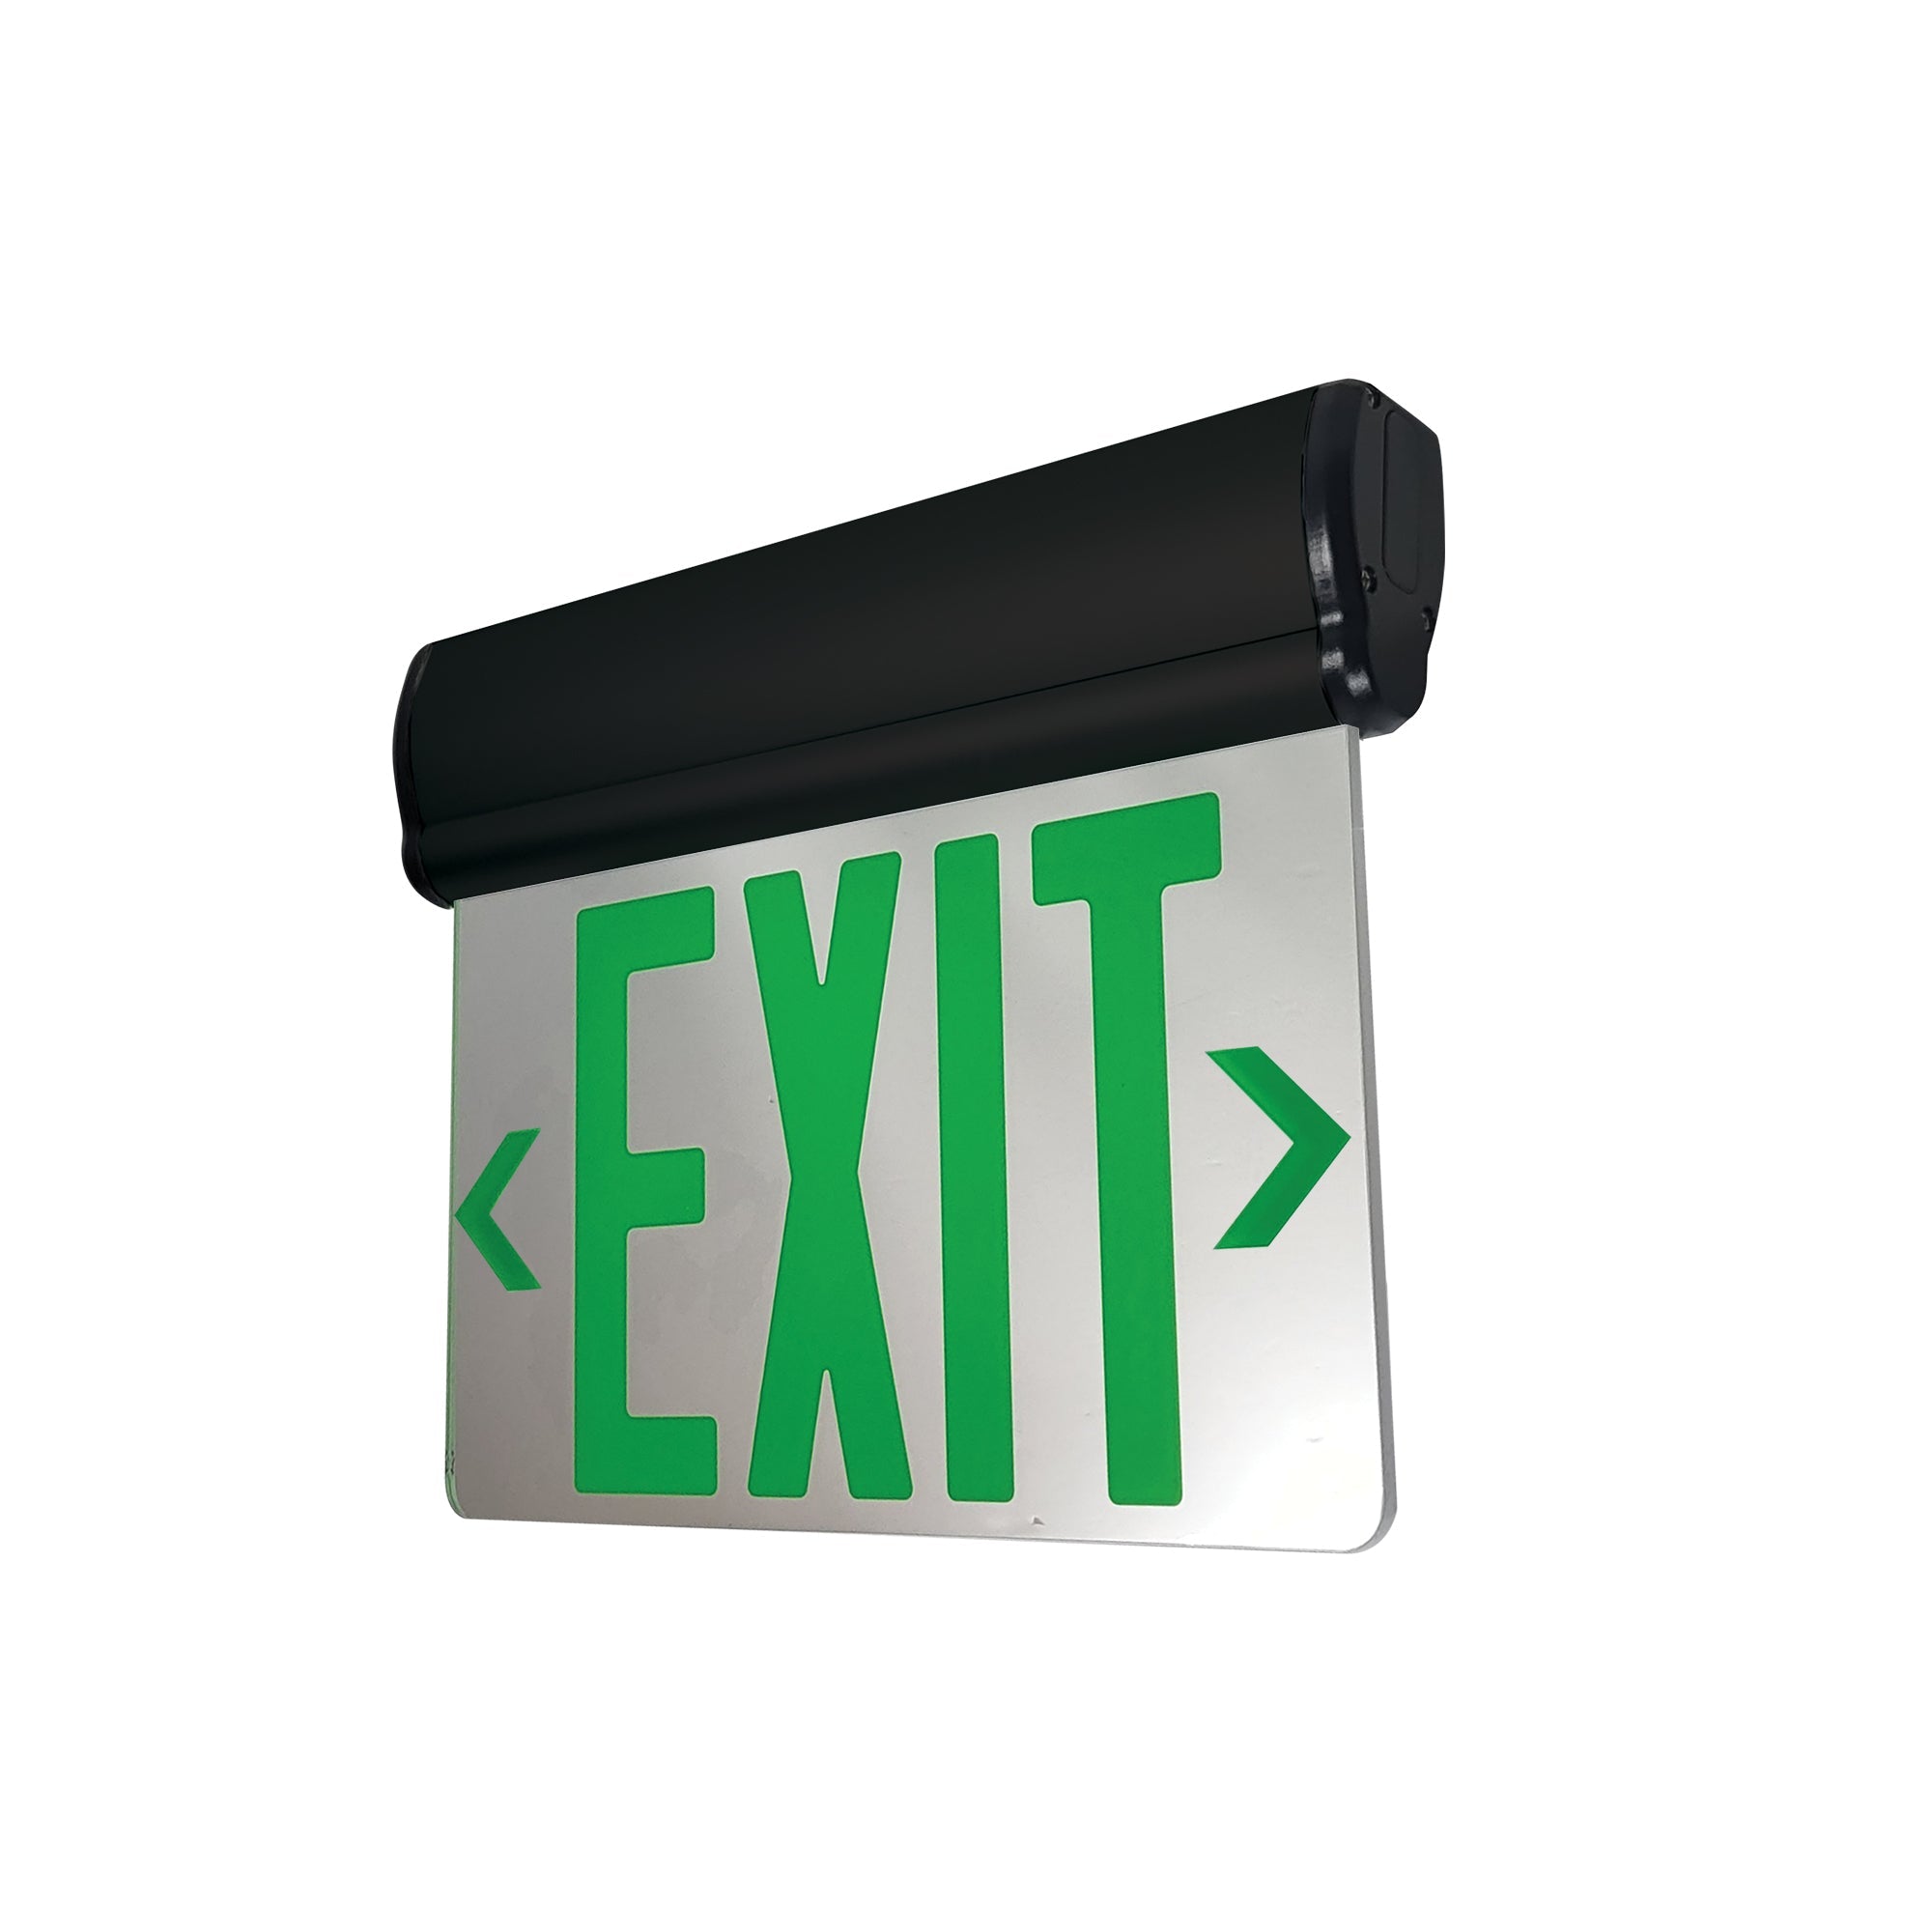 Nora Lighting NX-811-LEDGMB - Exit / Emergency - Surface Adjustable LED Edge-Lit Exit Sign, 2 Circuit, 6 Inch Green Letters, Single Face / Mirrored Acrylic, Black Housing